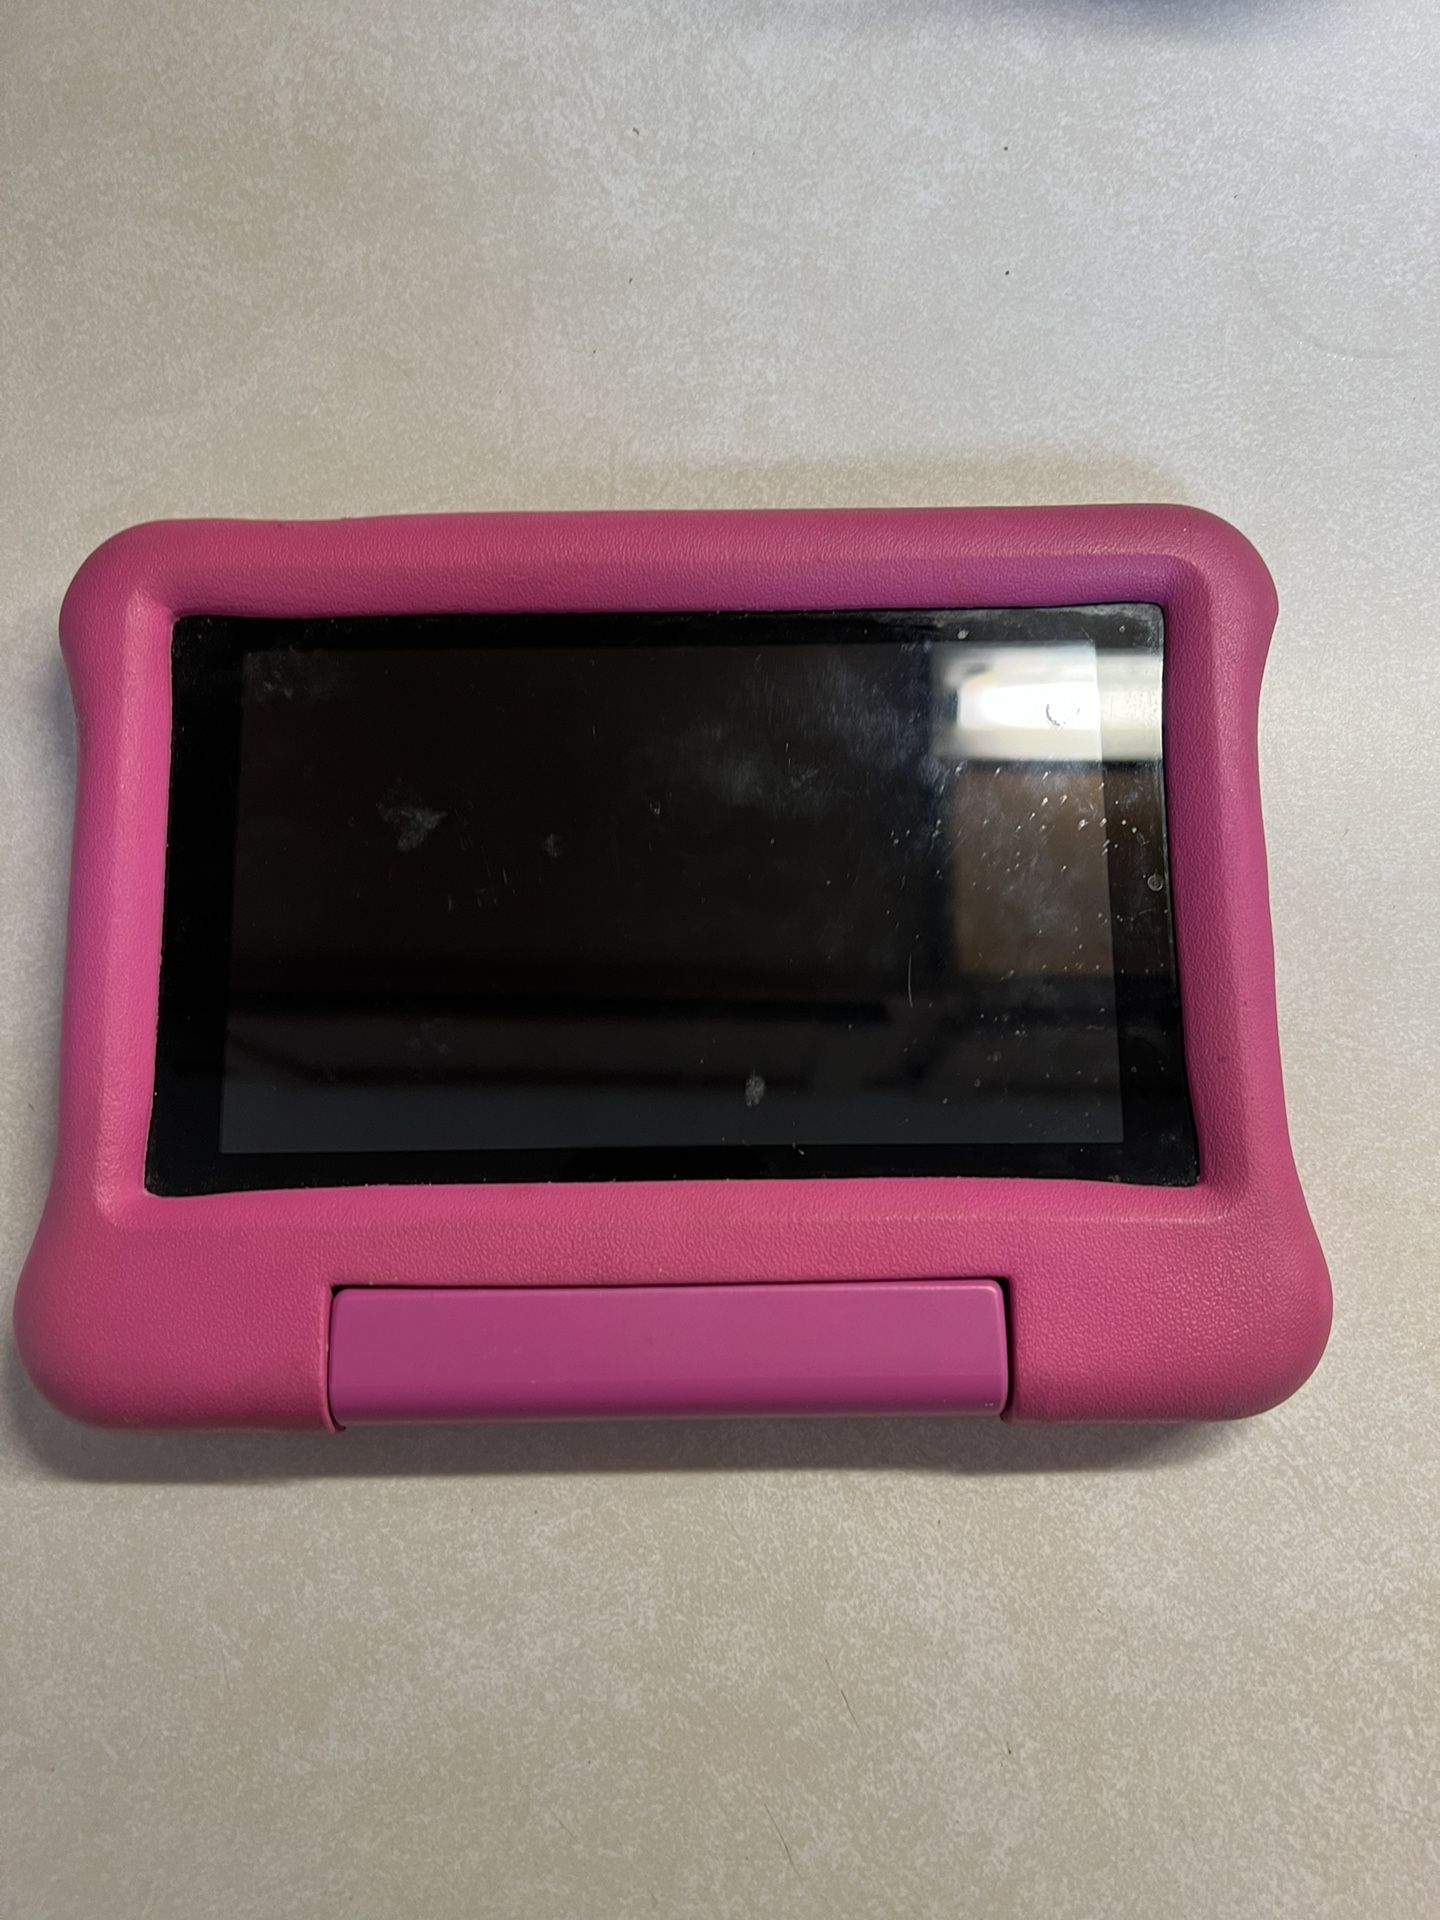 Amazon Fire Tablet 7 (Pink) 